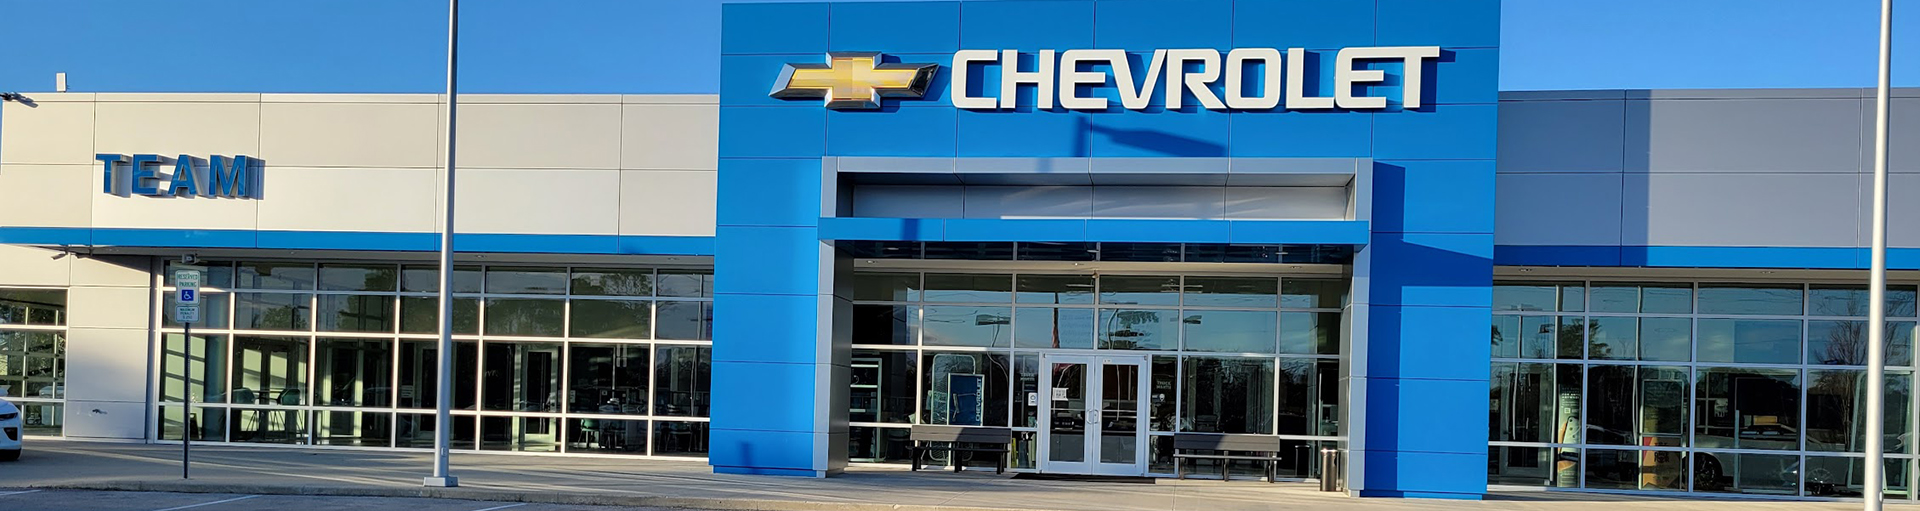 Chevrolet Pickup and Delivery Service in Swansboro, NC